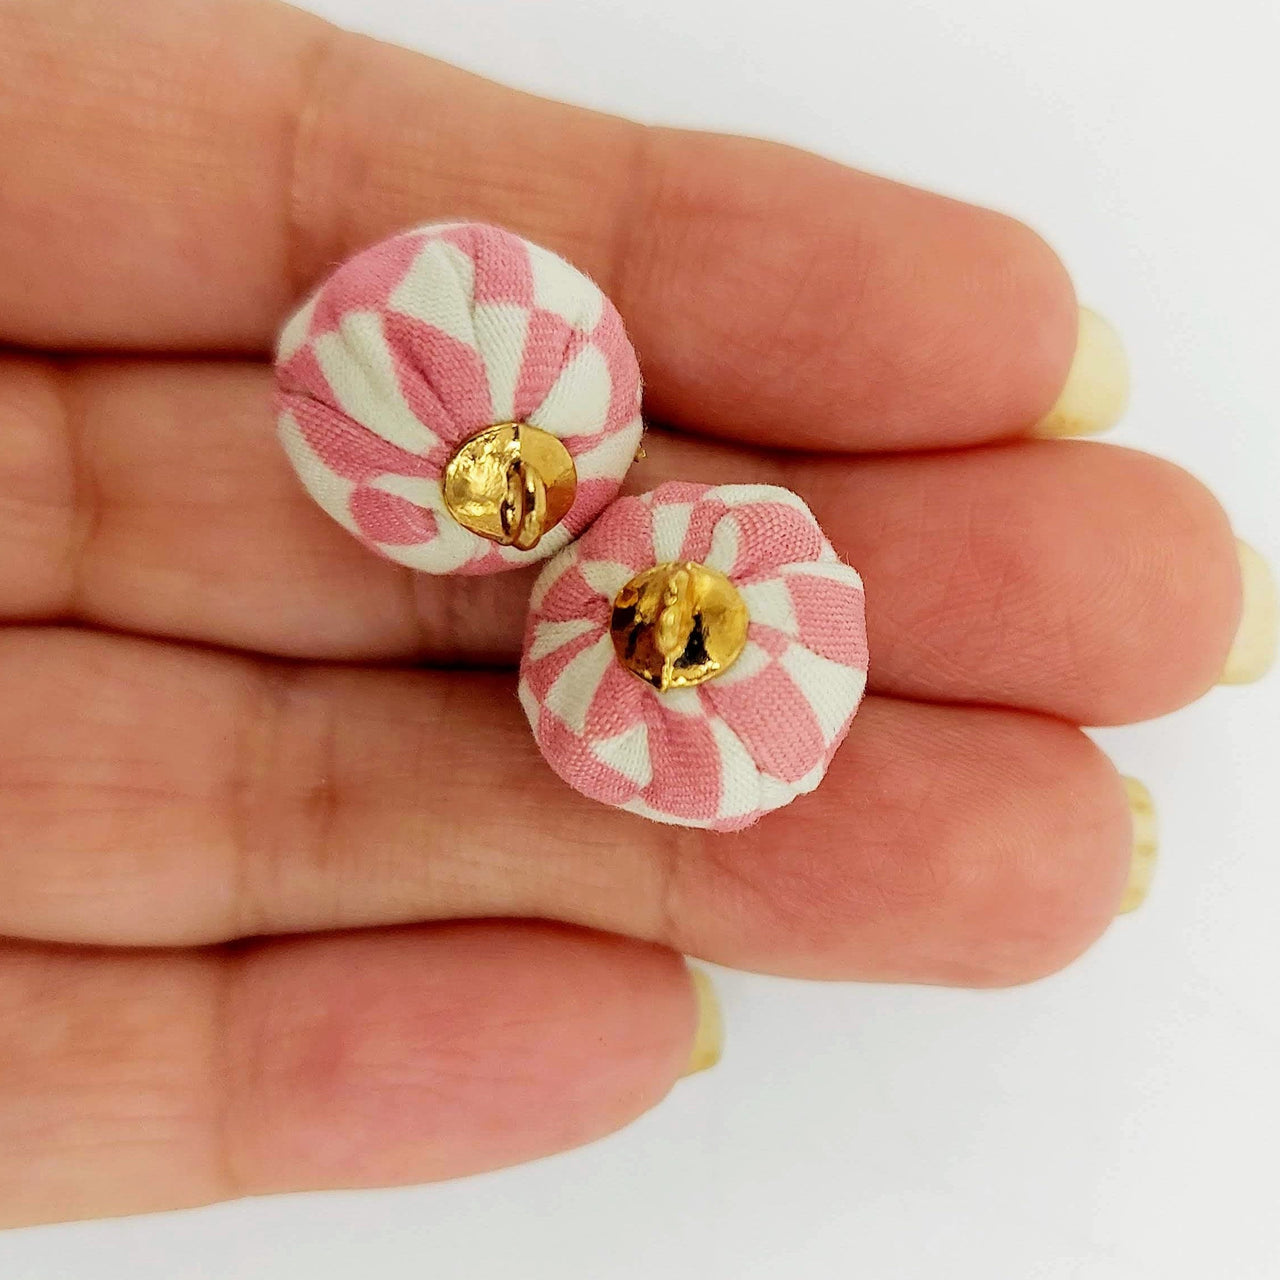 Pink and White Checkered Cotton Fabric Balls Tassel, Button with Ring Cap, Decorative Tassels